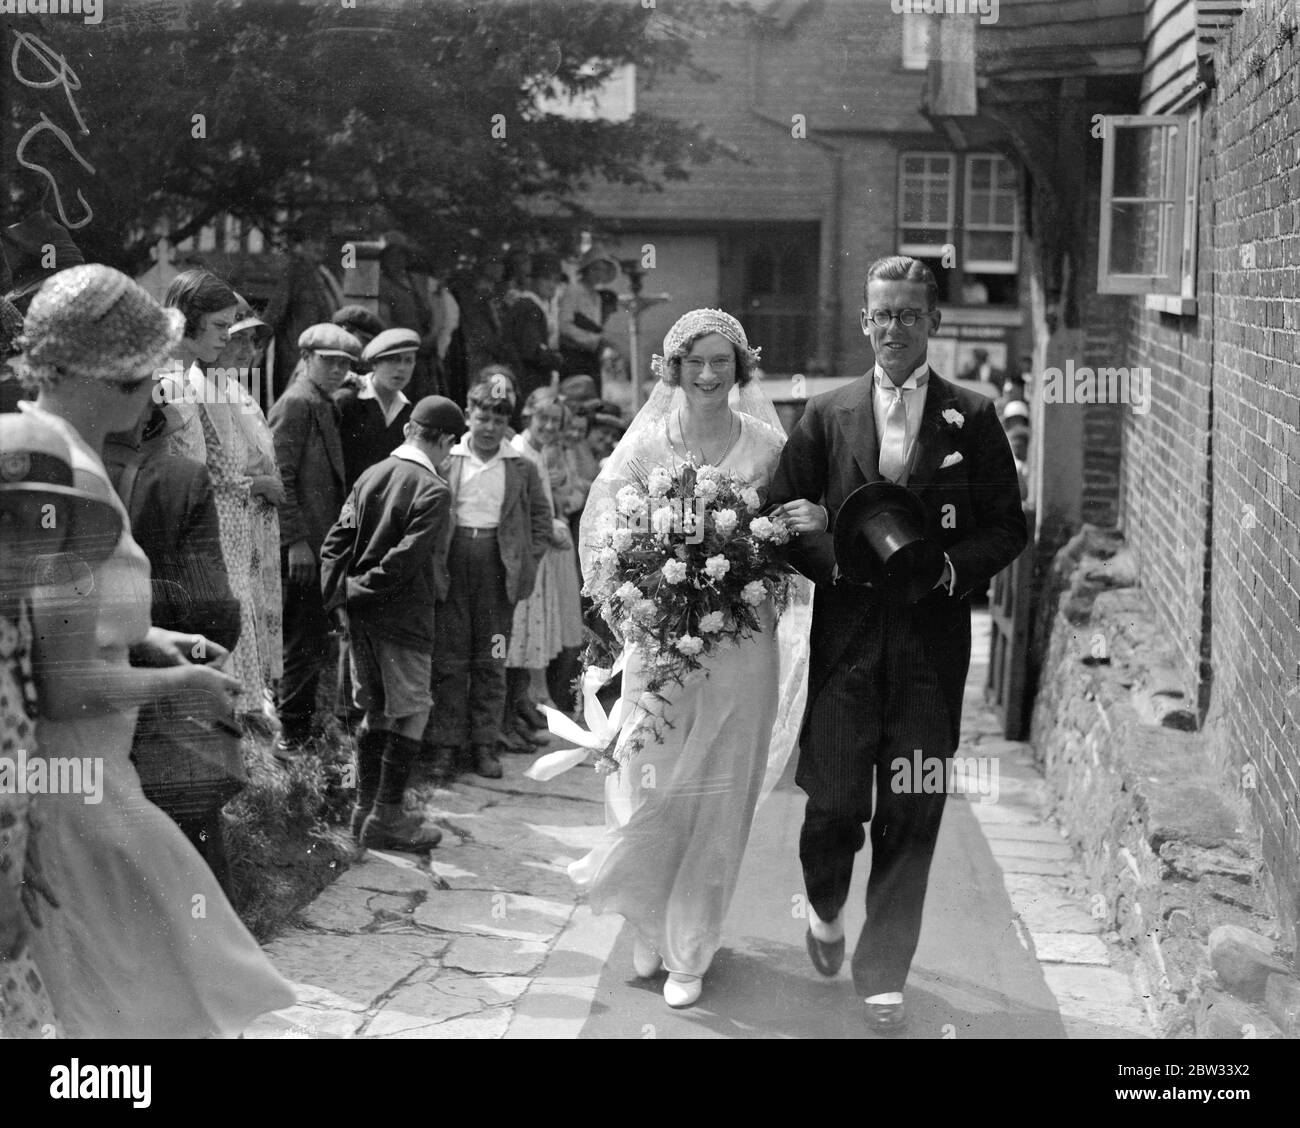 Heiress with veto on marriage acts as bridesmaid to her sister at staplehurst wedding . Miss Marjorie Clementson , daughter of the Rector of Staplehurst , Kent , who was left a large fortune providing she did not marry acted as a bridesmaid to her sister , Miss Vera Clementson , at her wedding to Major A Simkins , at Staplehurst Parish Church . Mr Bernard Thorp , Miss Clementson ' s fiance , acted as usher . The bride and groom ( on right 0 with Miss Marjorie Clementson the bridesmaid and her fiance Mr Bernard Thorp pf Manchester who acted as usher , after the wedding . 8 August 1932 Stock Photo